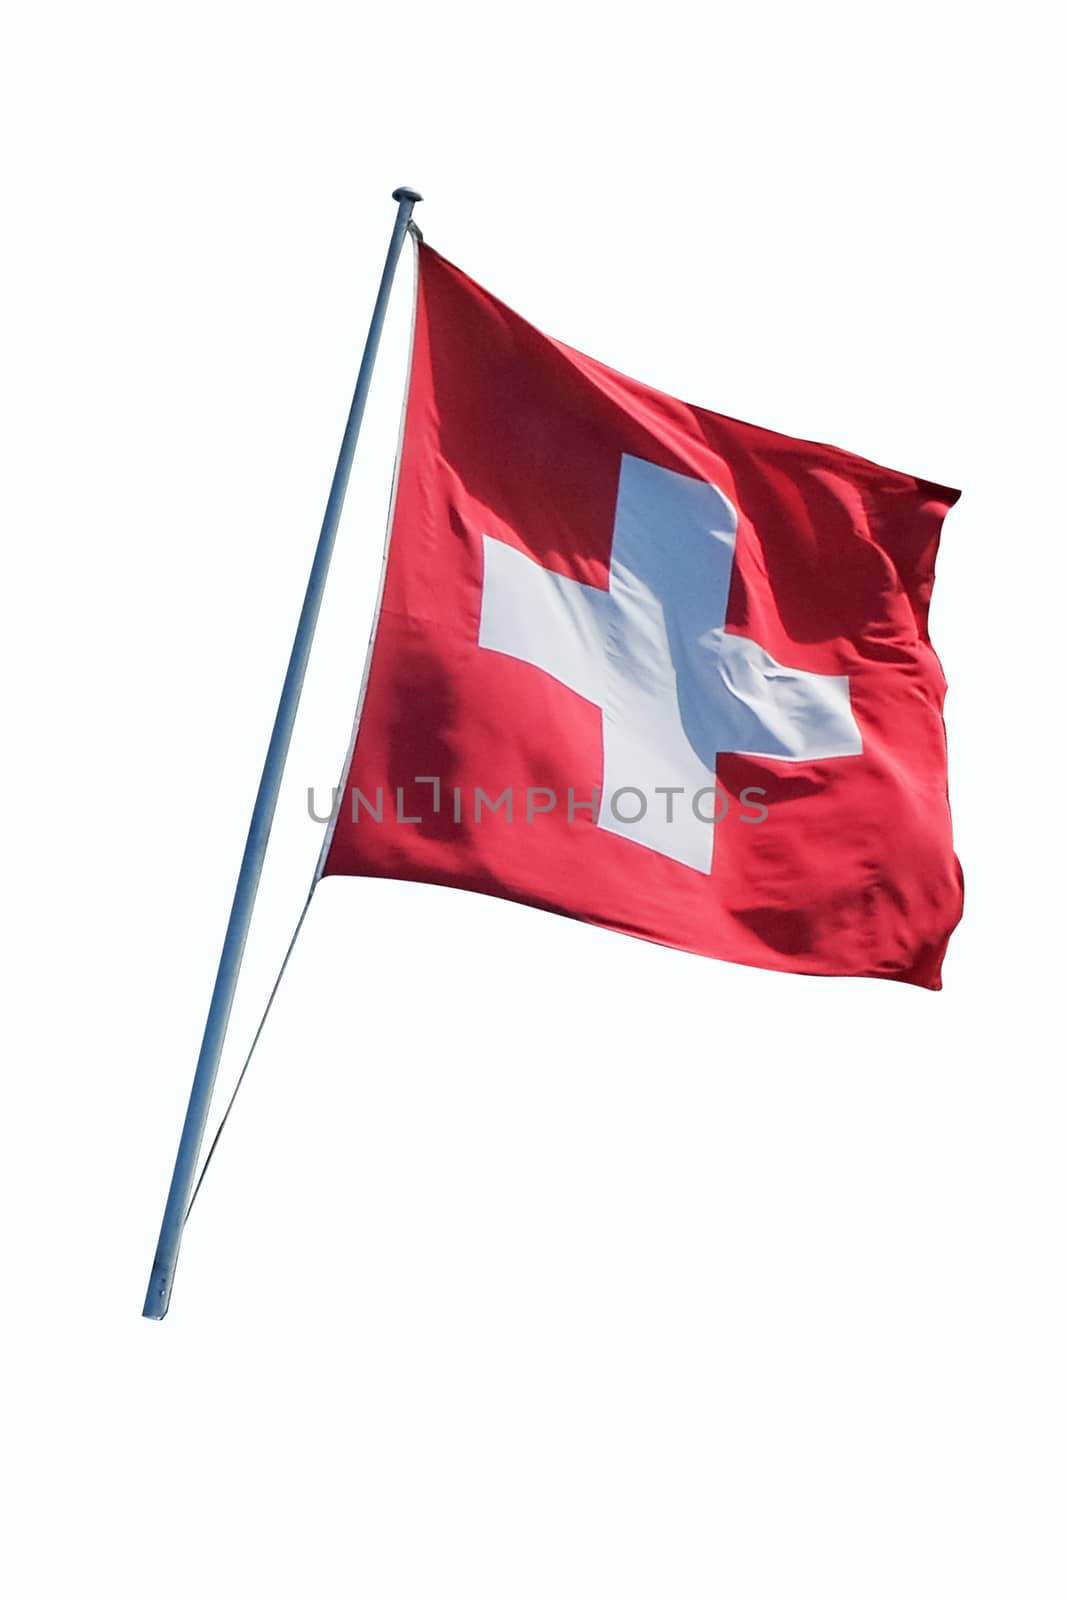 Swiss flag flying on a metal pole, isolated on a white background with clipping path 